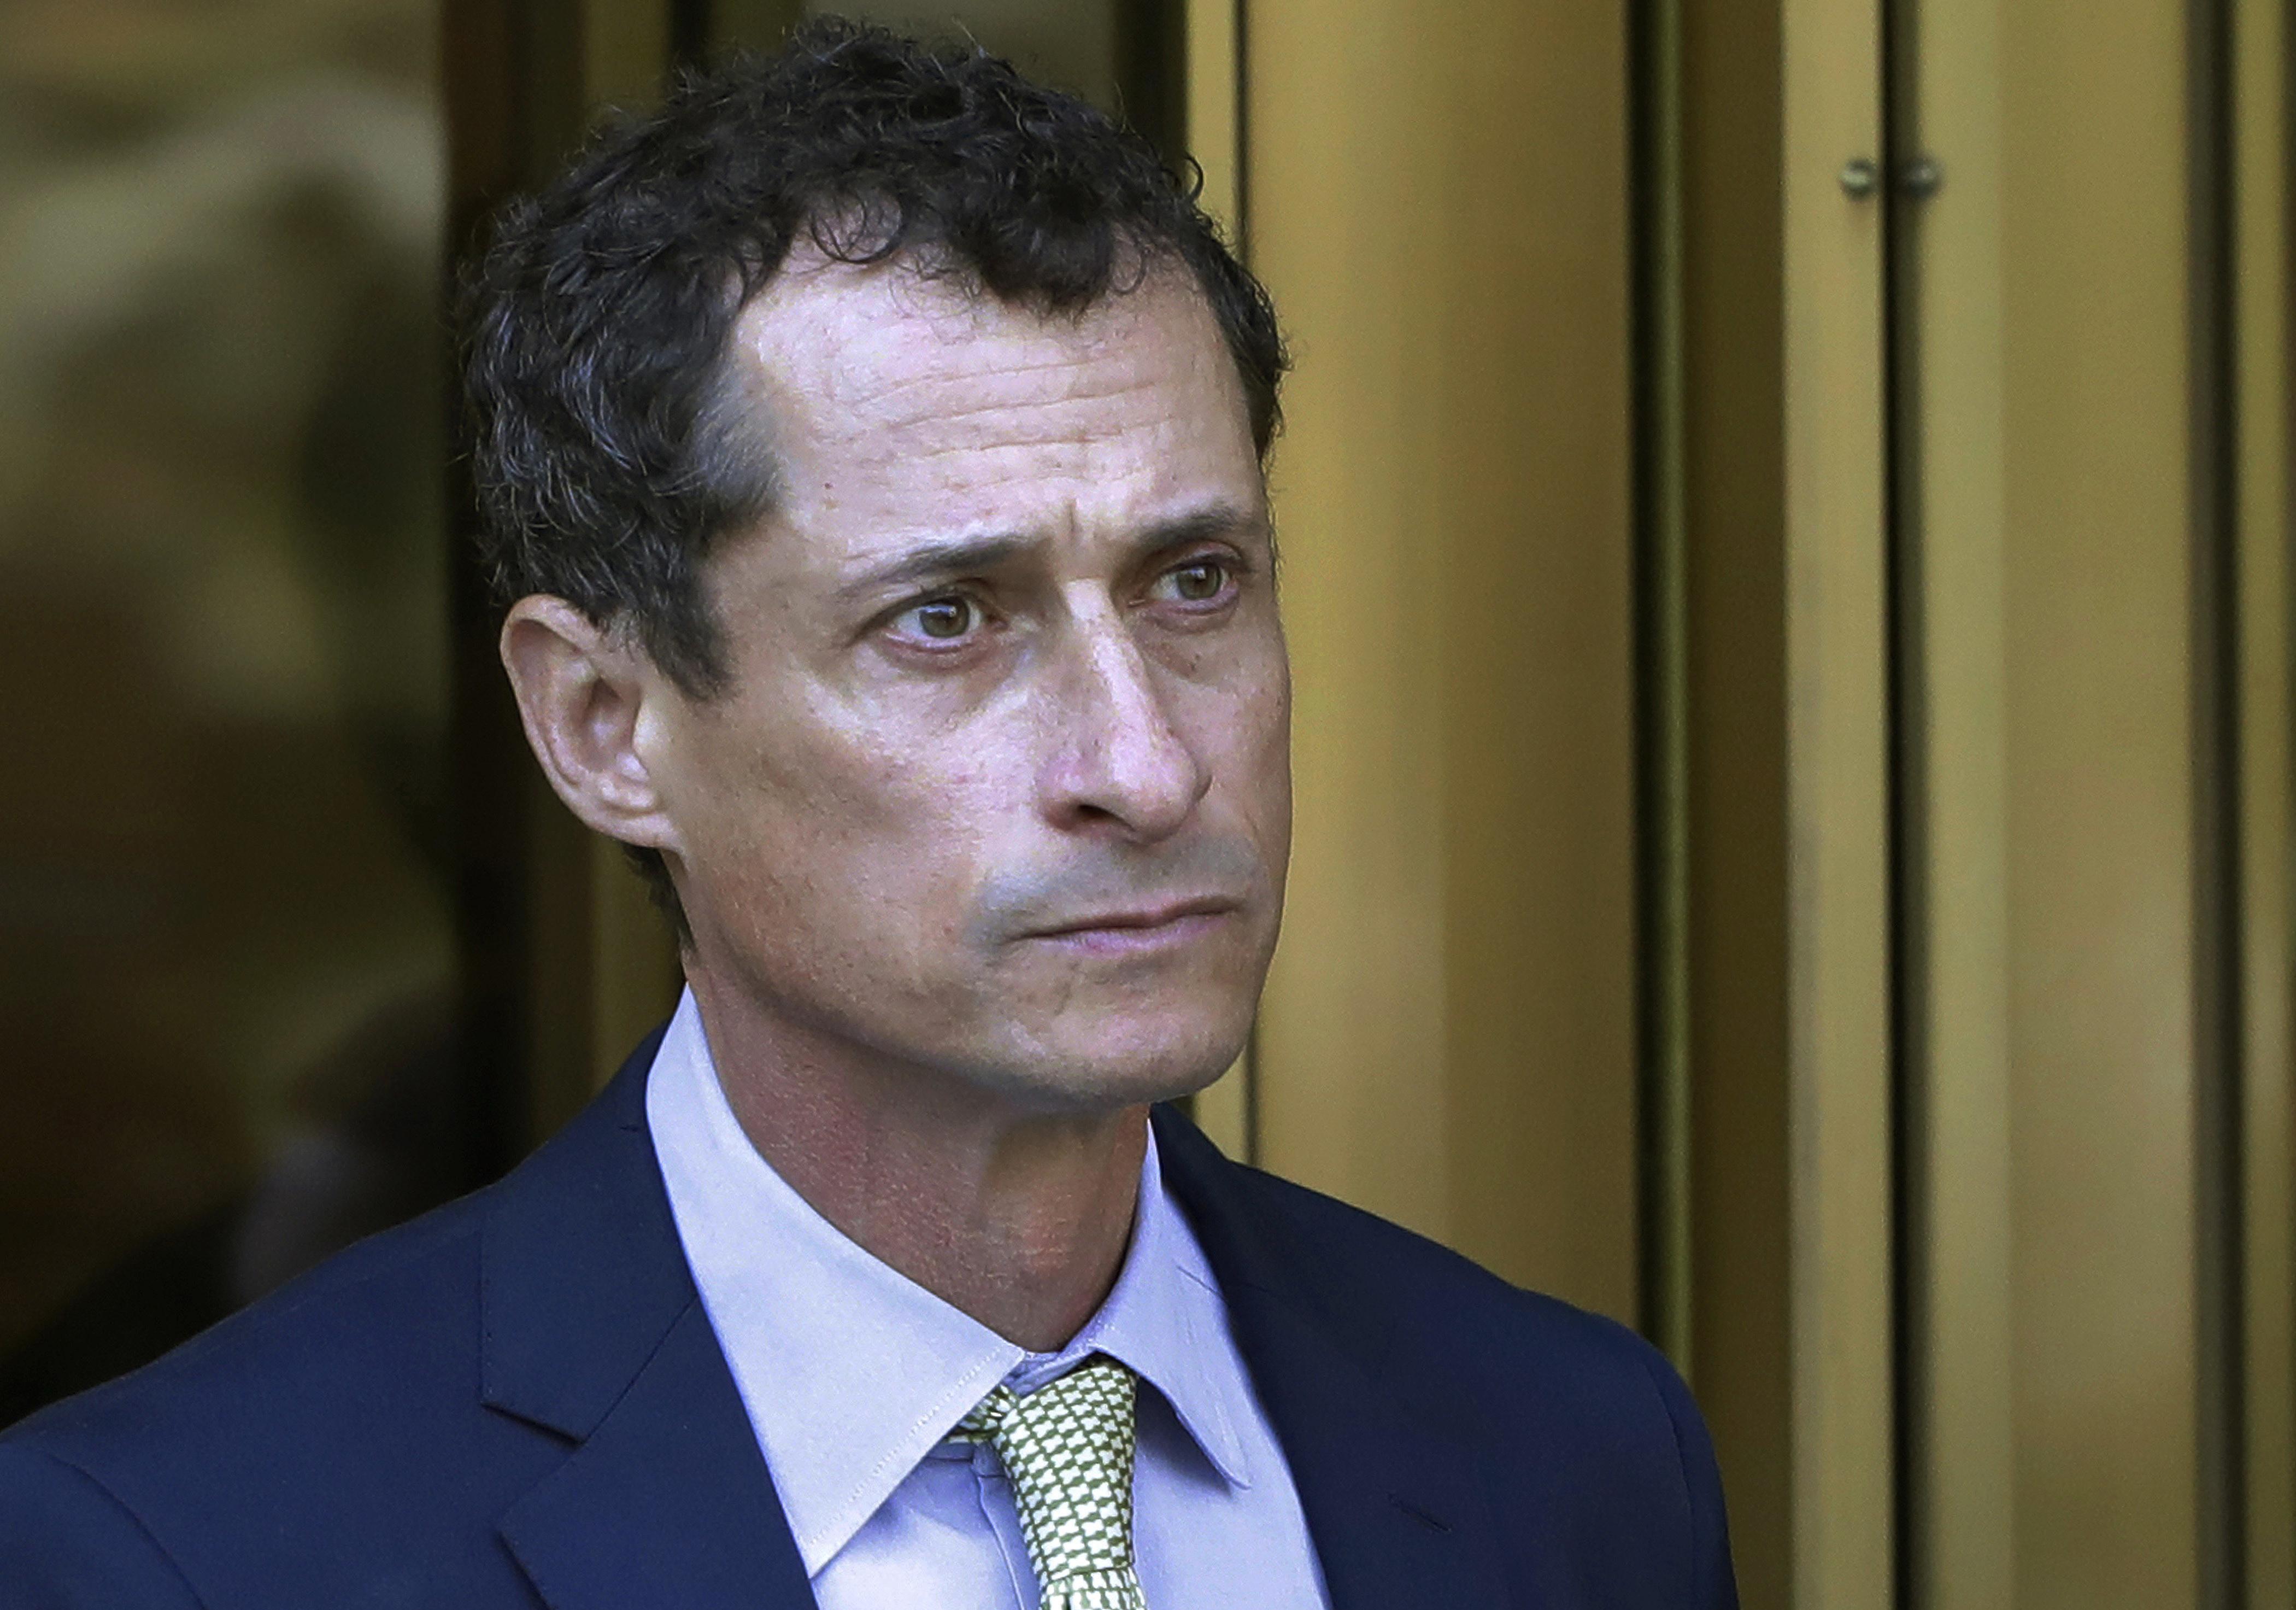 Disgraced Ex Congressman Anthony Weiner Released From Prison The 2089